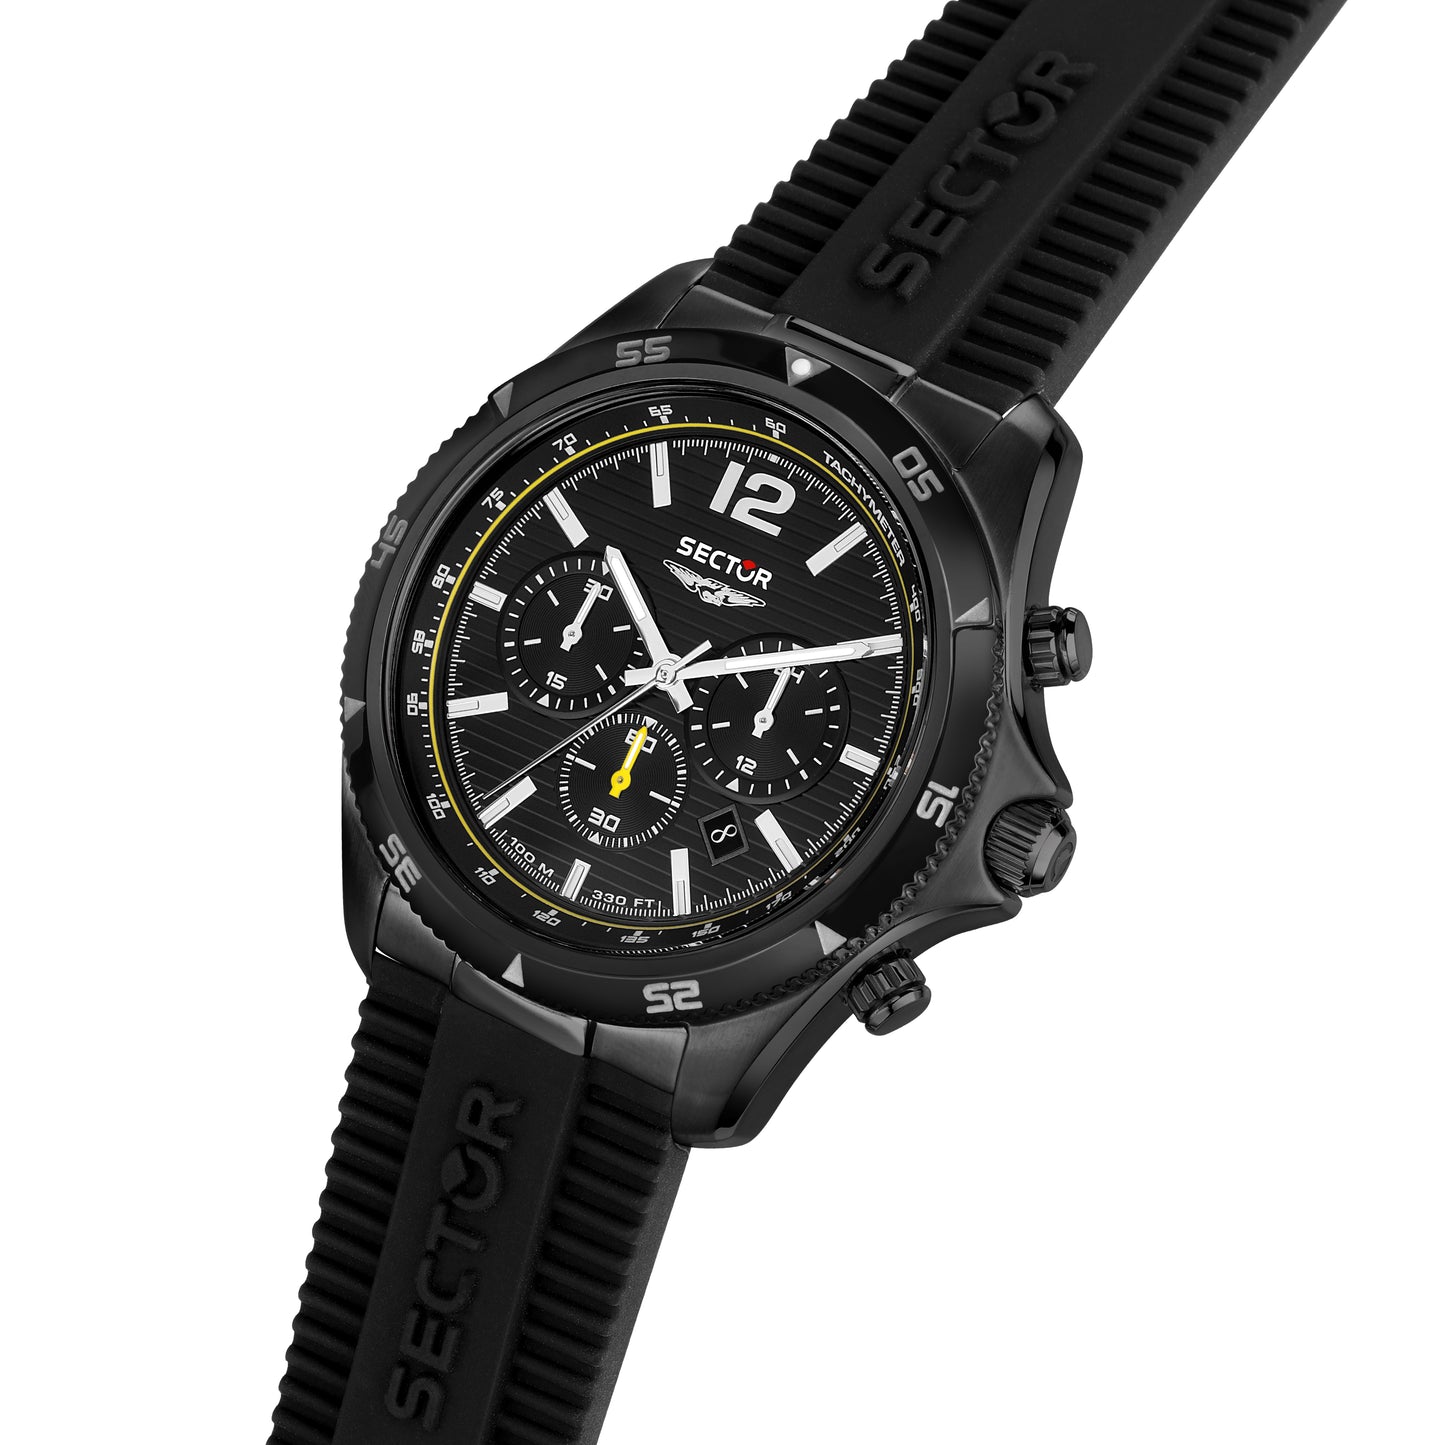 MONTRE SECTOR 650 R3271631001